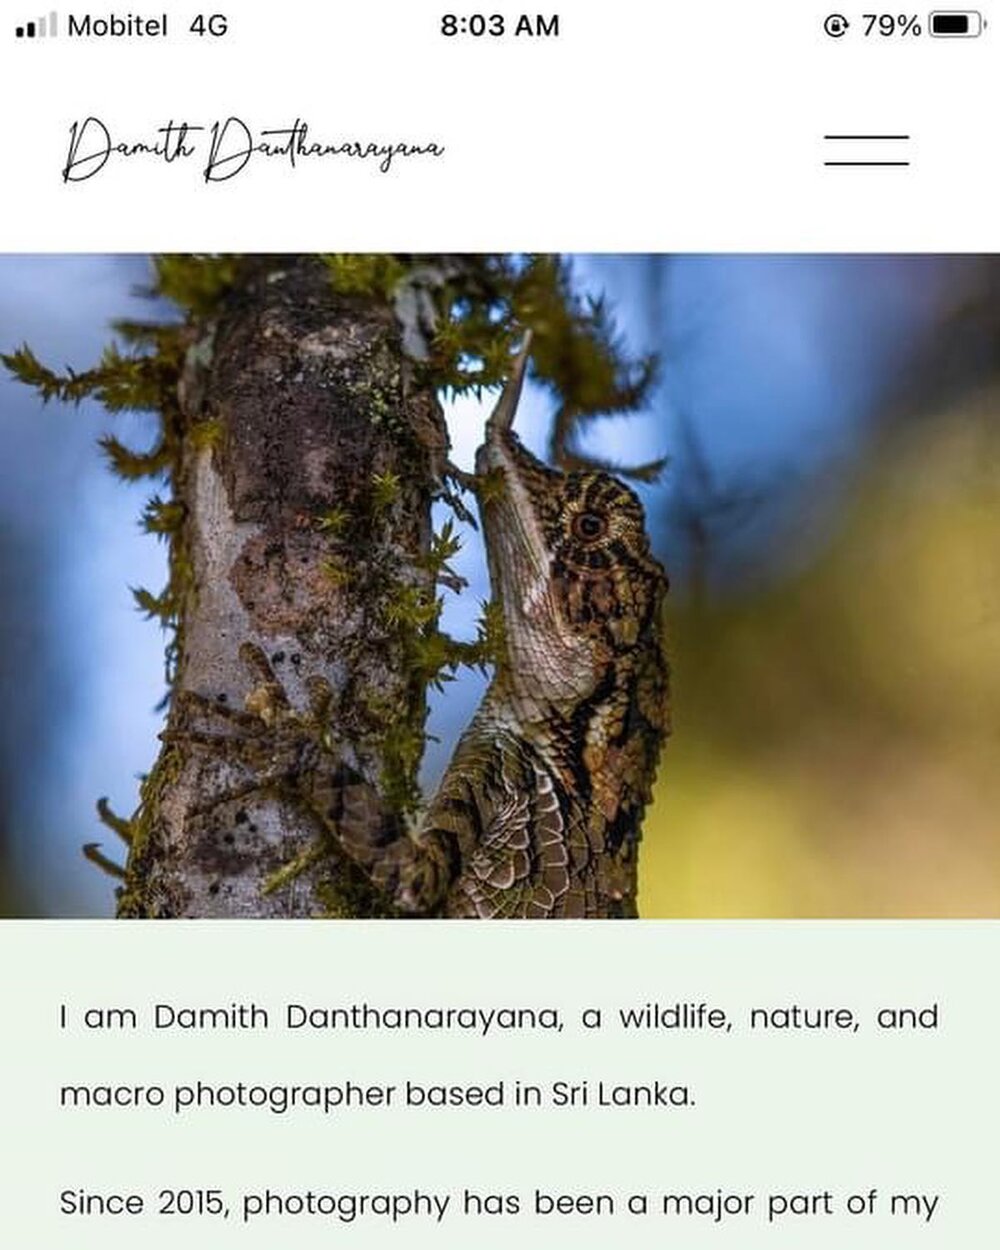 My website and blog about &quot;Wildlife &amp; Nature Photography&quot;

https://www.damithdanthanarayana.com
.

#wildlife #wildlifeonearth #wildlifeofinstagram #wildlifeplanet #naturephotography #nature #learnphotography #photography #srilanka #macr